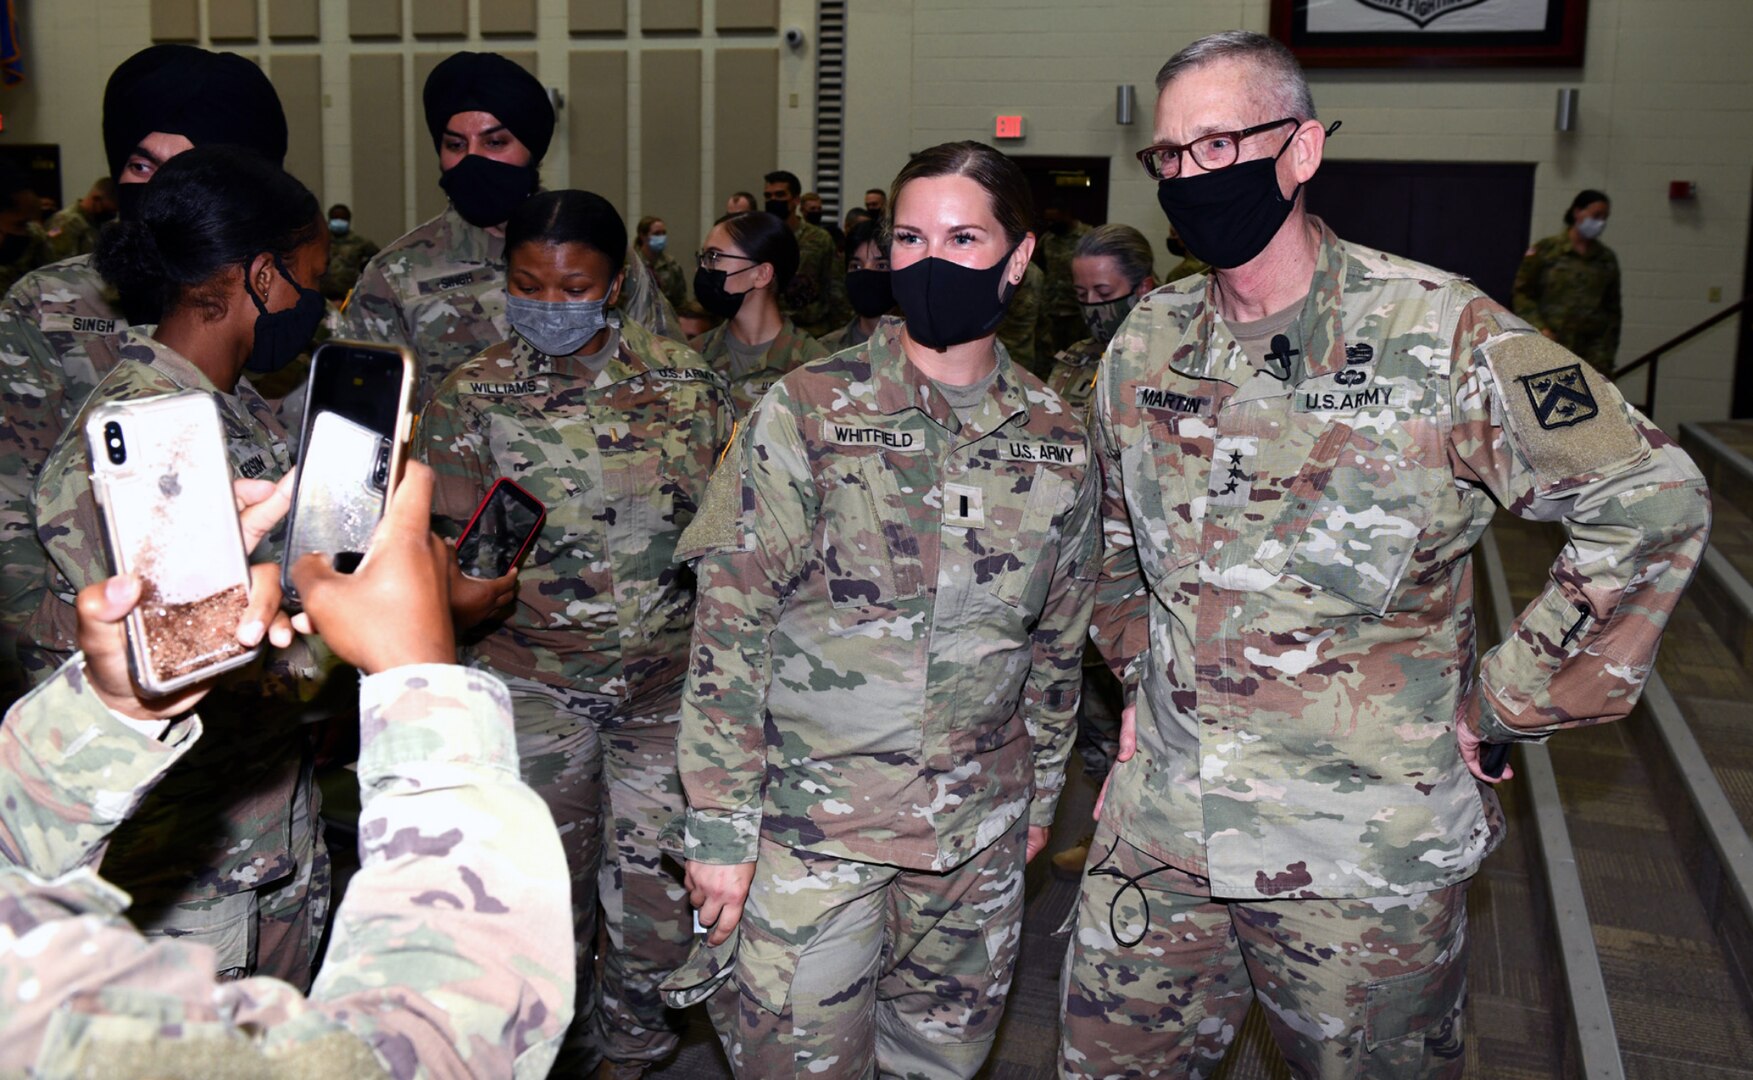 Lt. Gen. Theodore Martin, Commander U.S. Army Combined Arms Center, or CAC, visited U.S. Army Medical Center of Excellence, or MEDCoE, Joint Base San Antonio-Fort Sam Houston, Sept. 8-10.